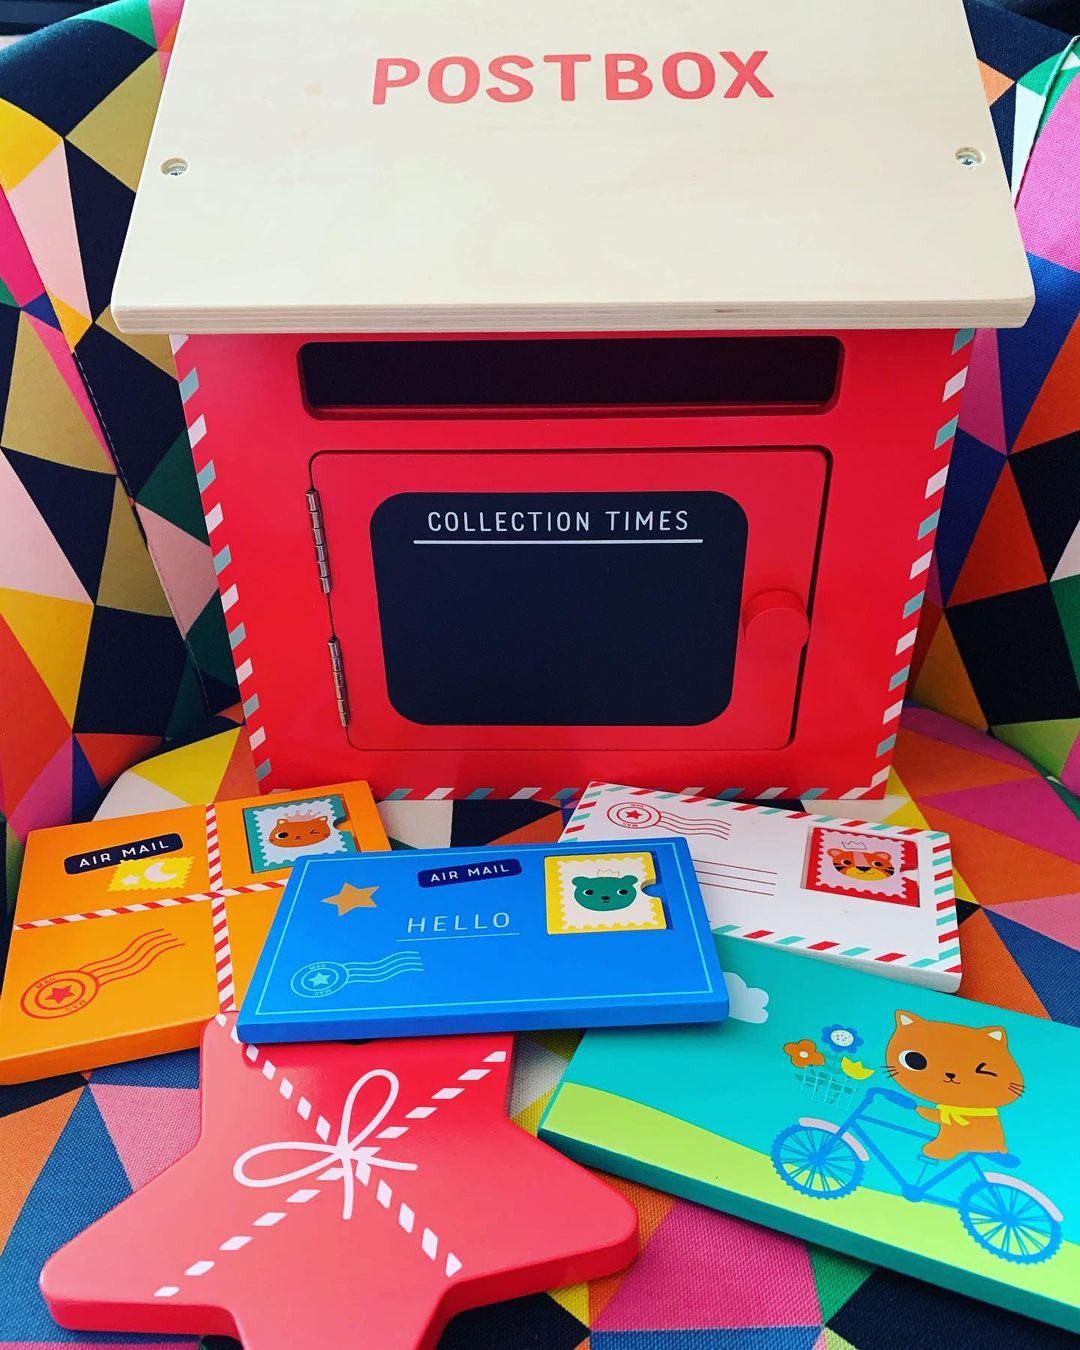 Kmart hacks for teachers: a wooden postal box with letters